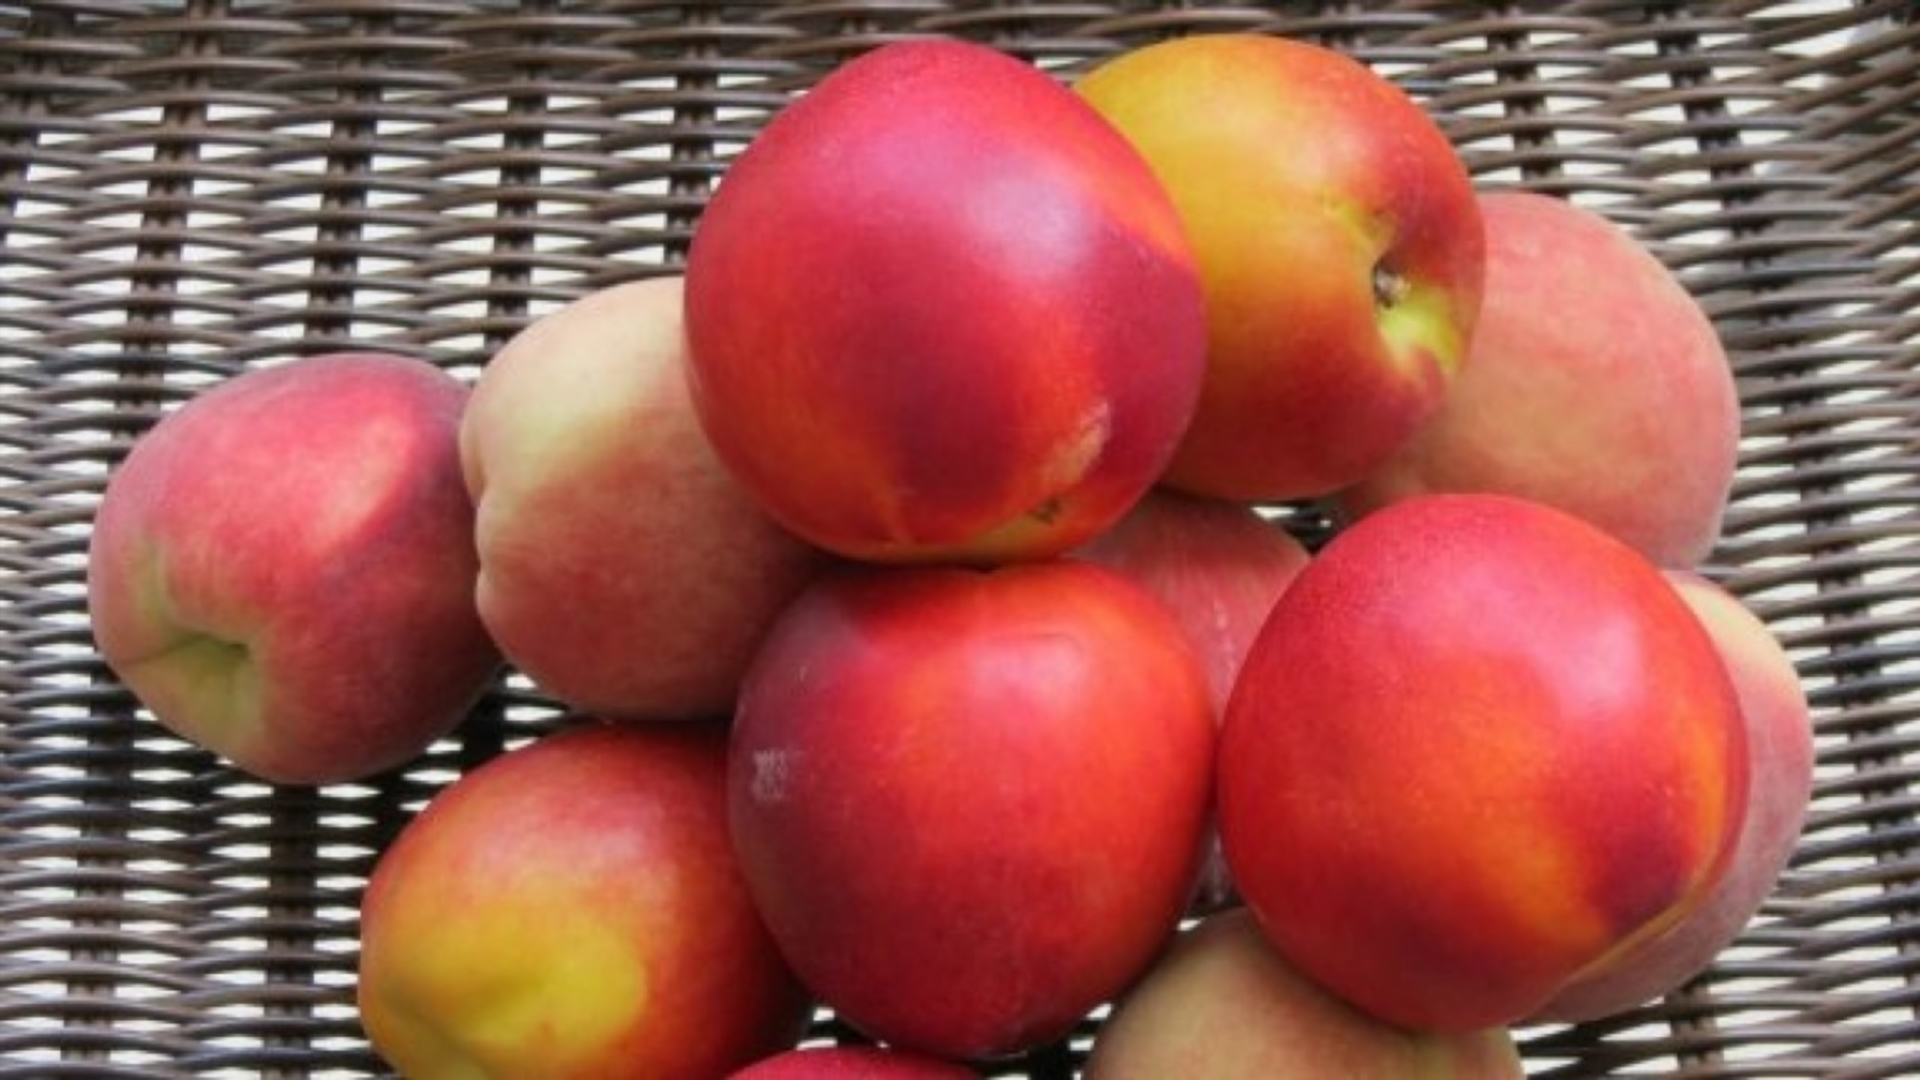 eating nectarines during pregnancy guide